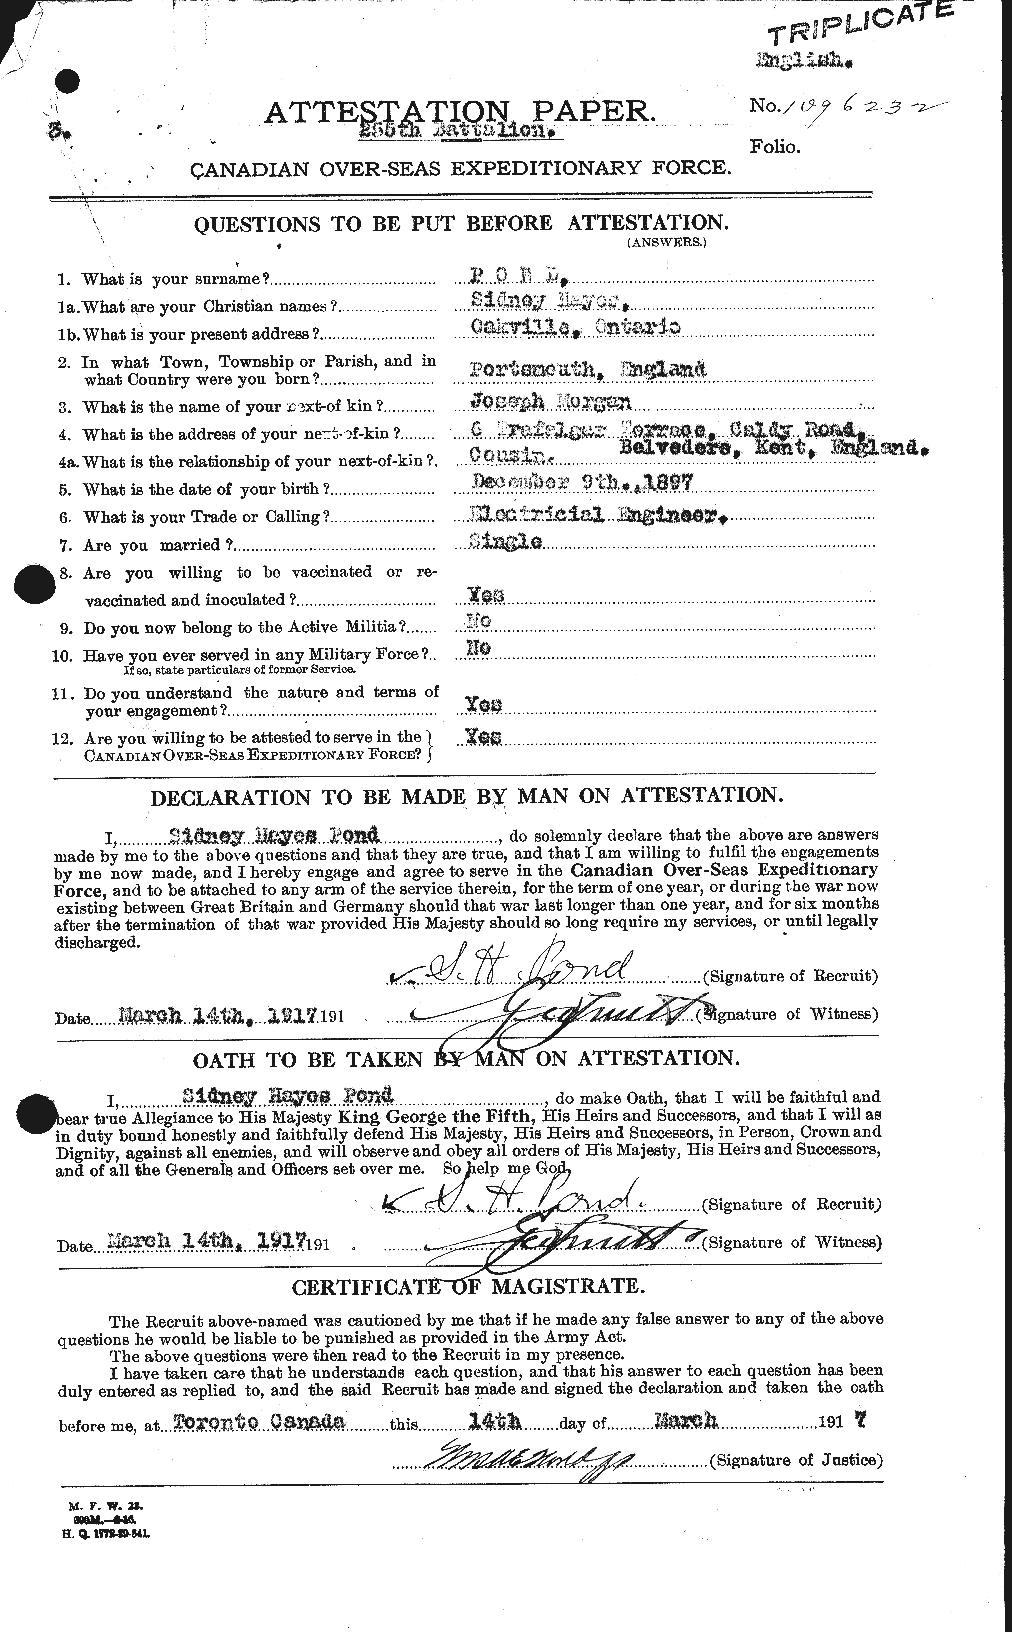 Personnel Records of the First World War - CEF 581118a